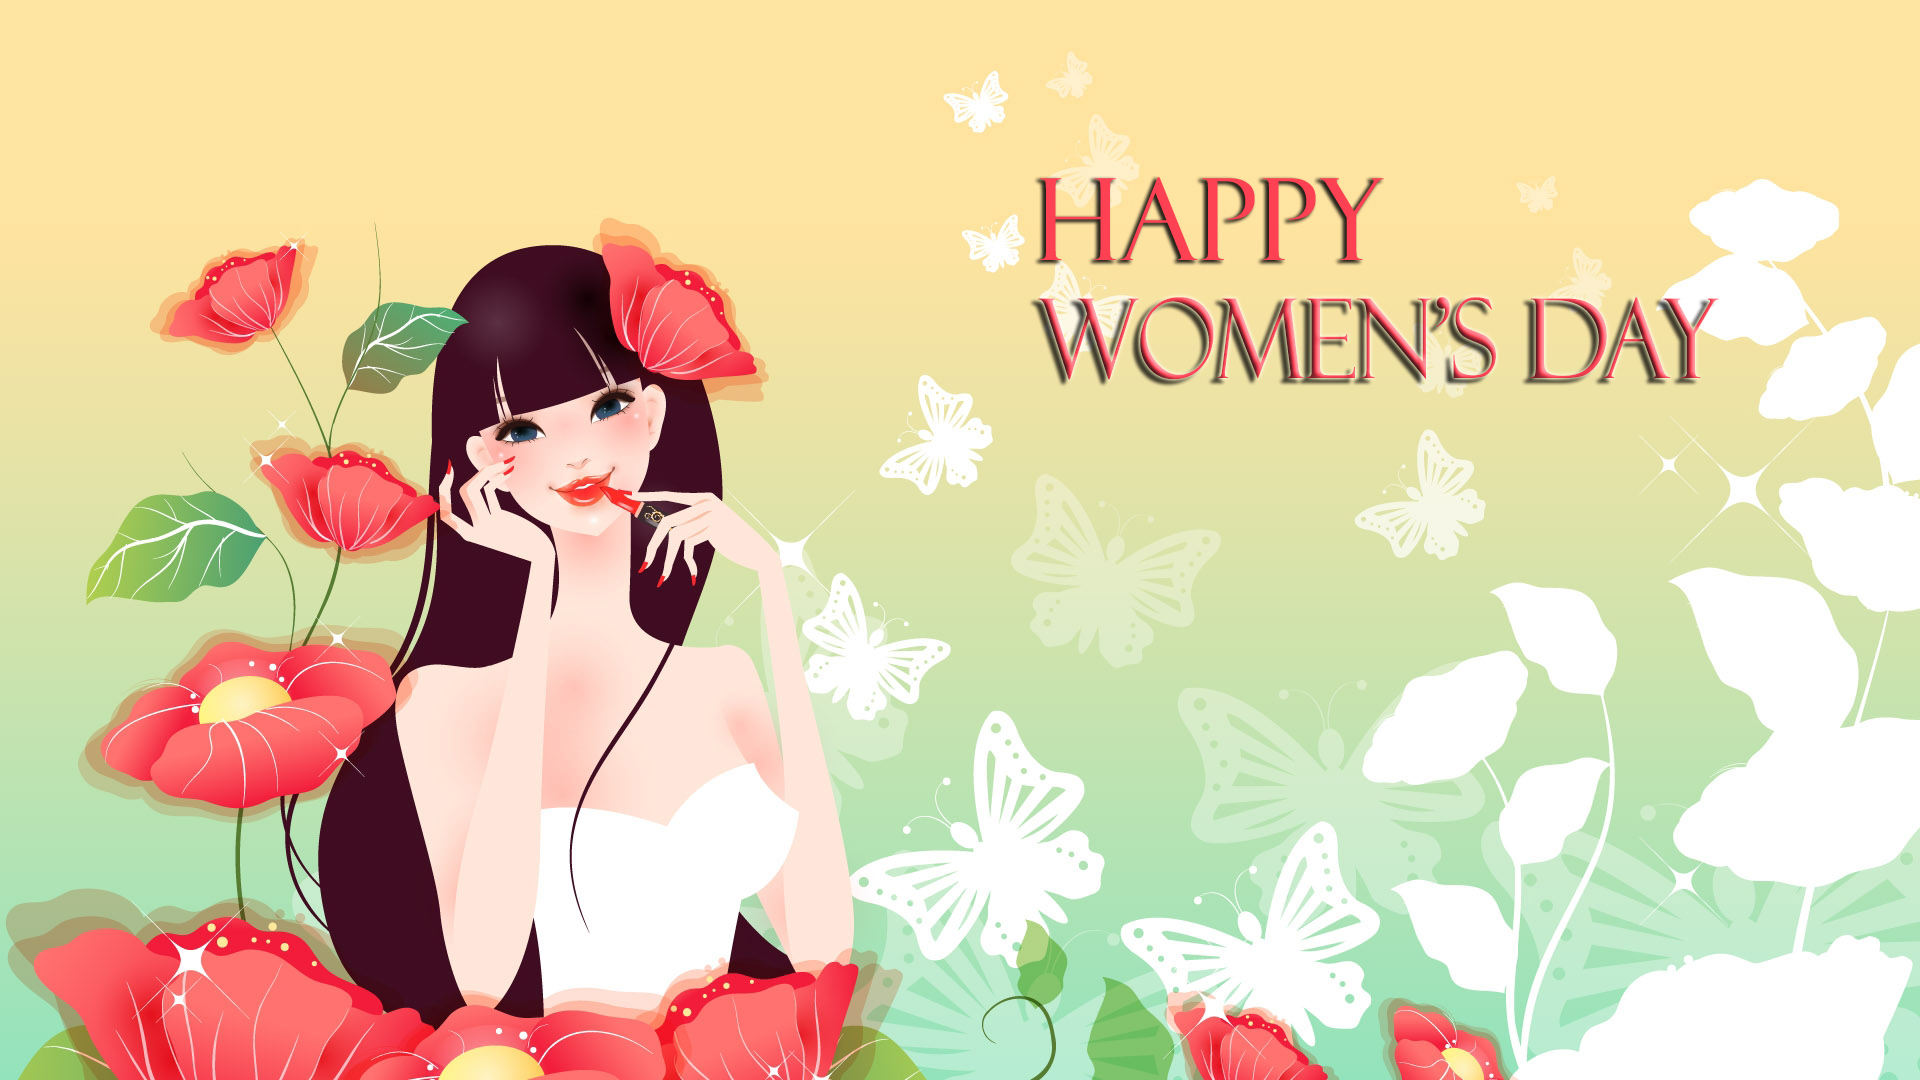 Greetings Cards for Women's Day - Women's day! - messageswishesgreetings.com